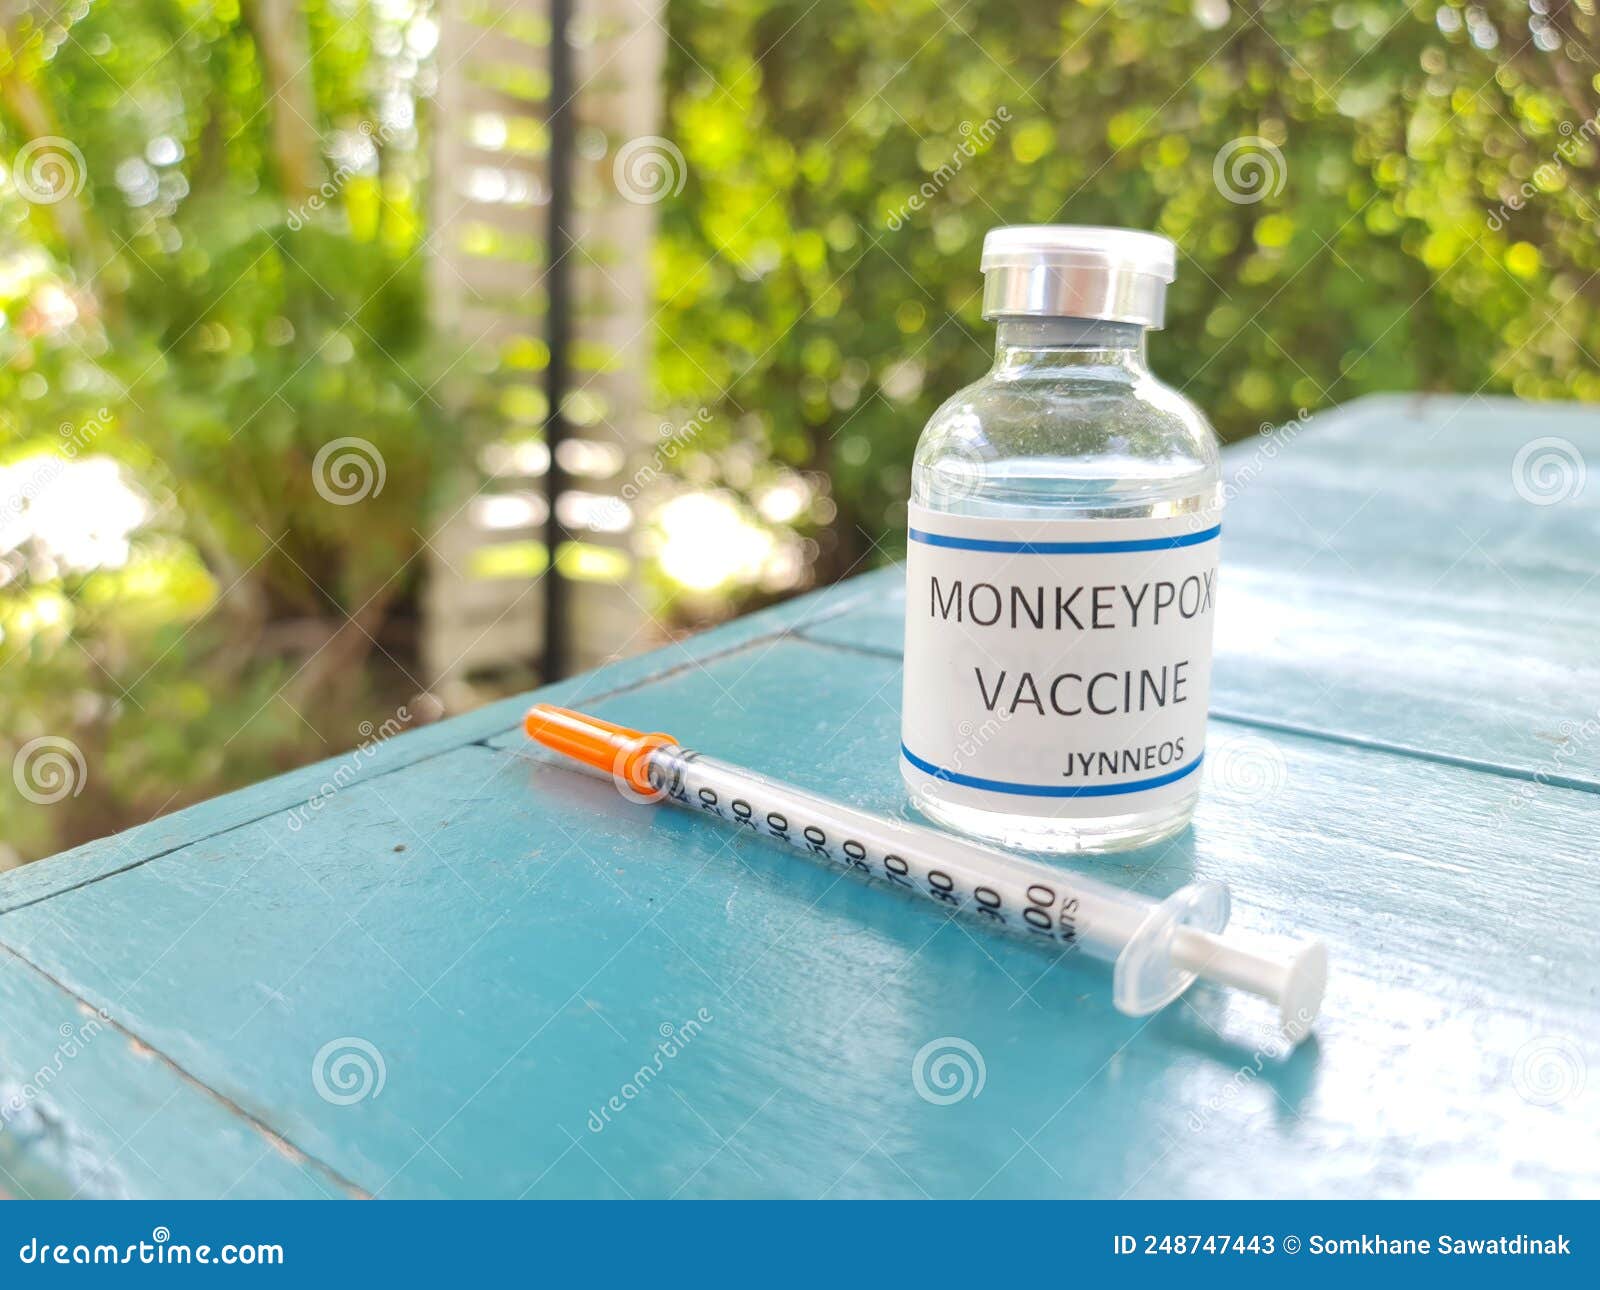 monkeypox virus vaccine,also known as moneypox virus, is a double-stranded dna, animal-to-human virus and strain of the genus.